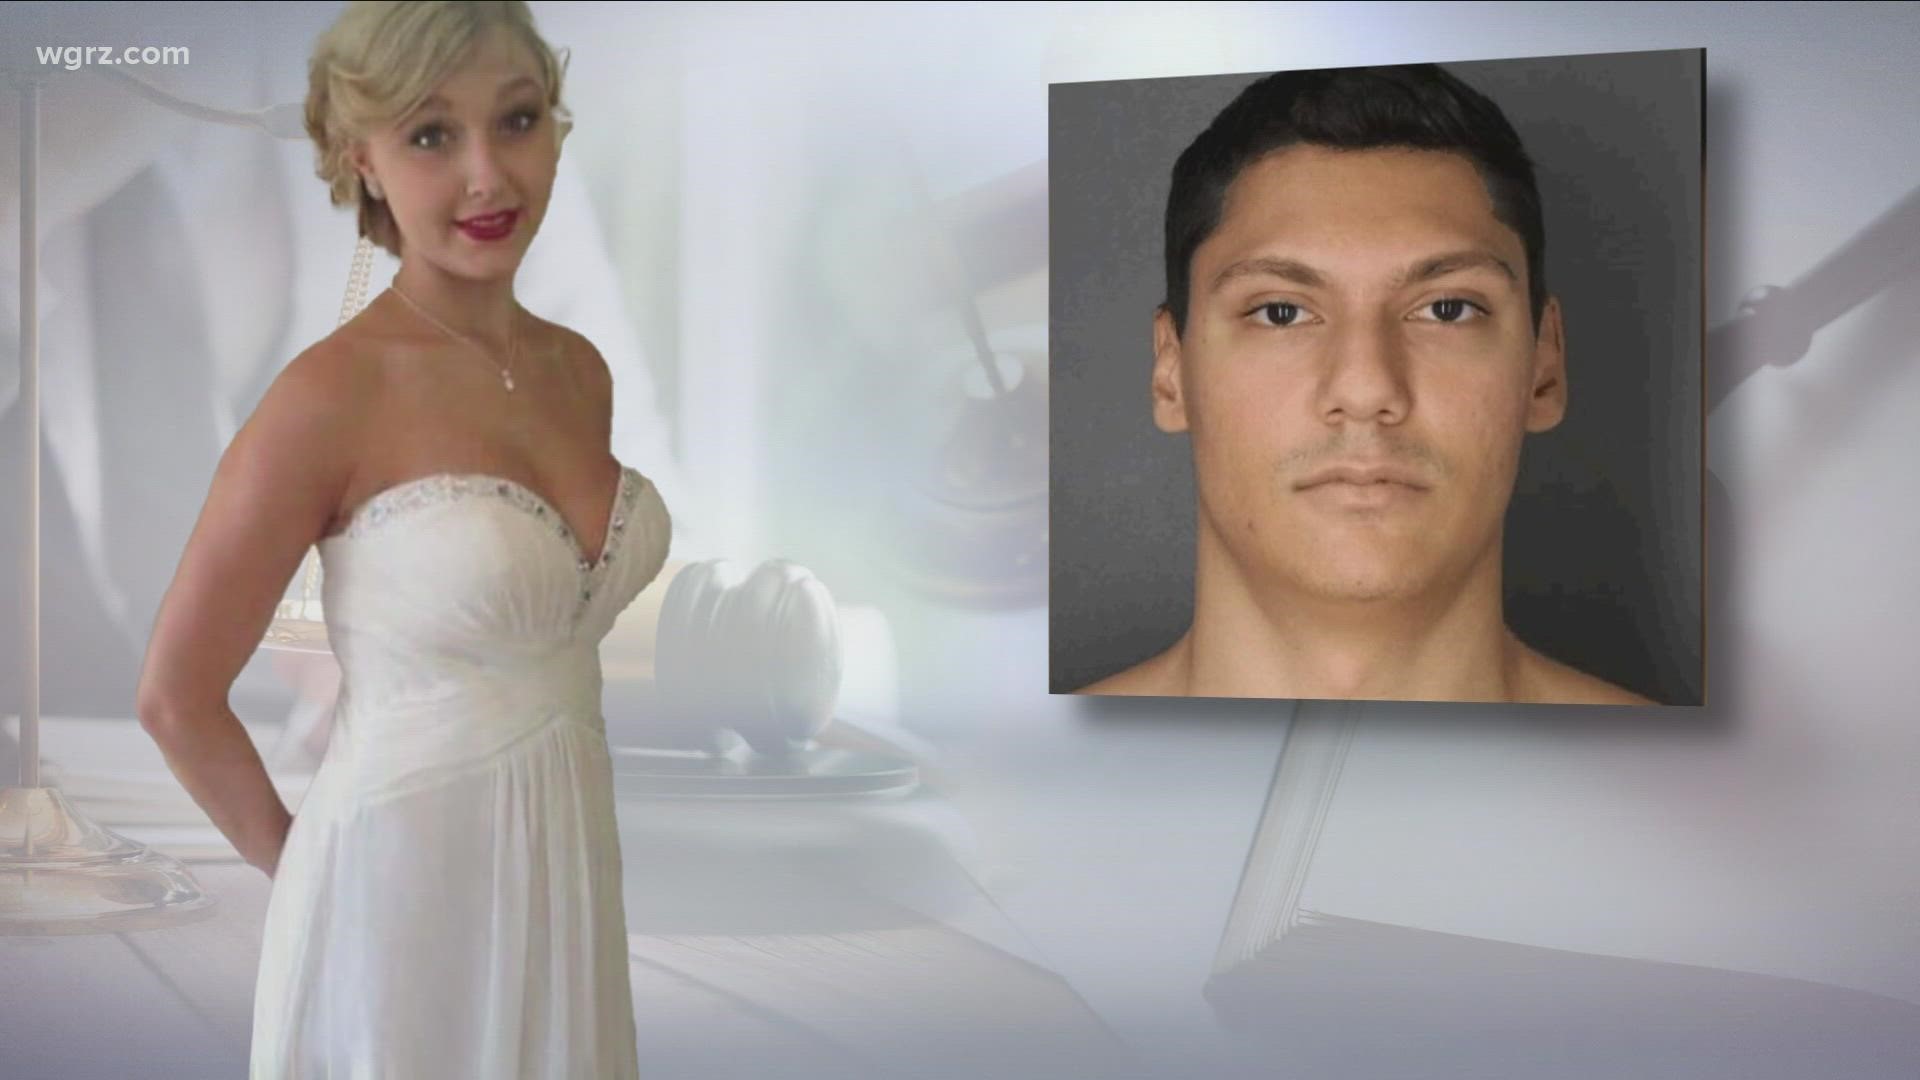 Shane Casado is accused of killing his estranged girlfriend Rachael Wierzbicki in November of 2018.
Two On Your Side has  information on what happened in court.